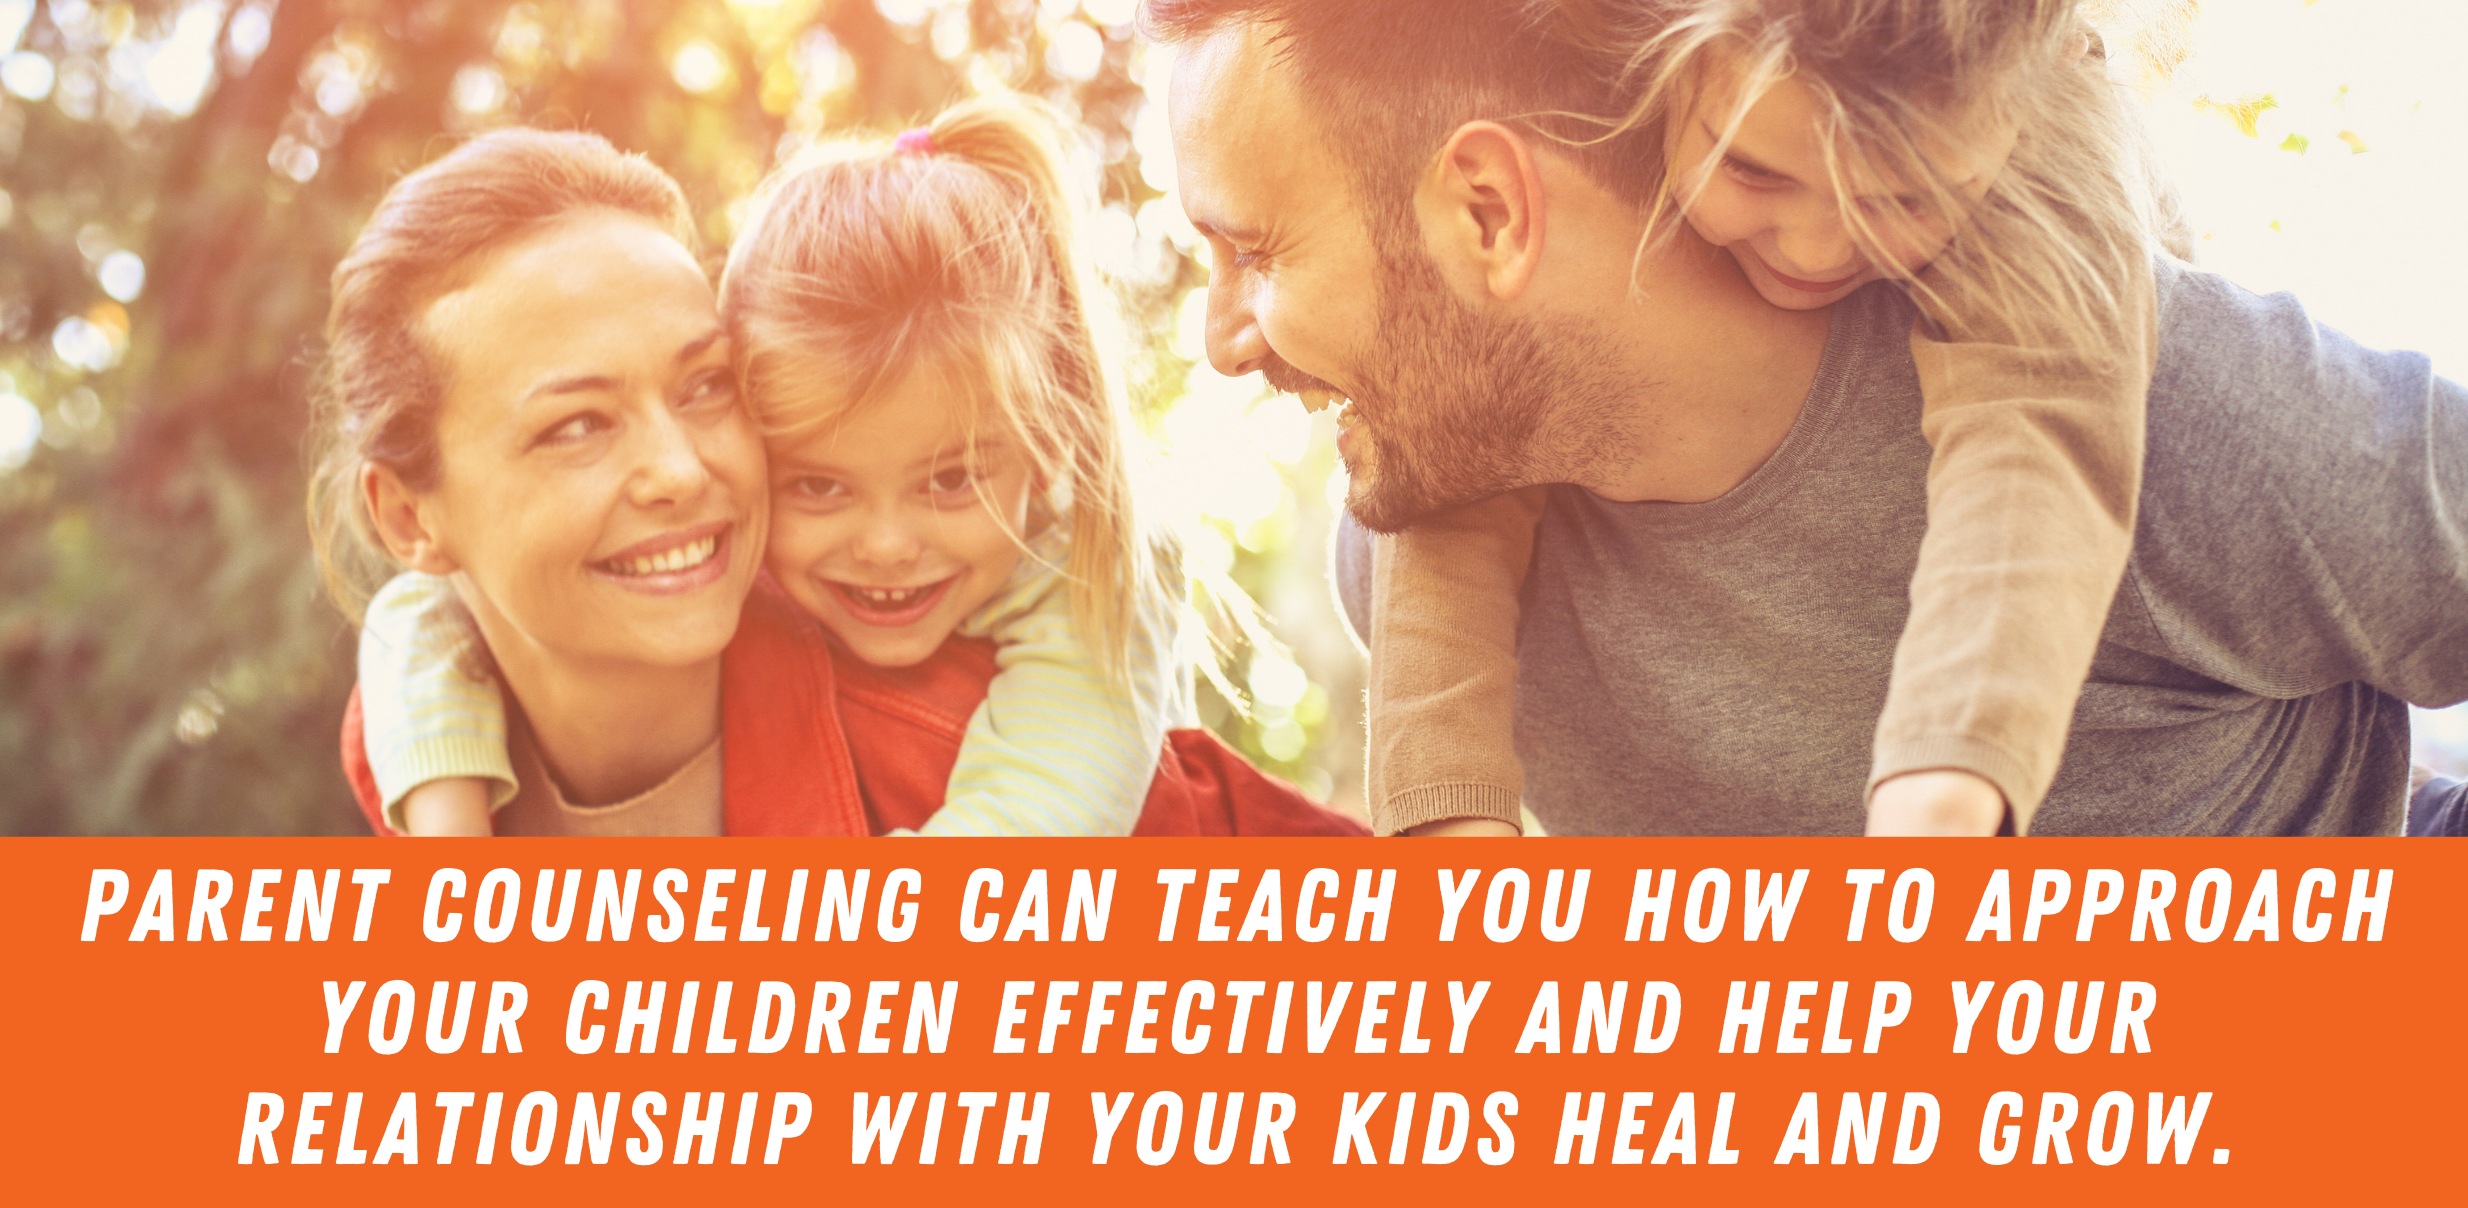 A graphic that reads "Parent counseling can teach you how to approach your children effectively and help your relationship with your kids heal and grow." in white text on a dark orange background below a stock photo of a white man and woman with two small children riding on their backs, the man and woman are looking at each other.